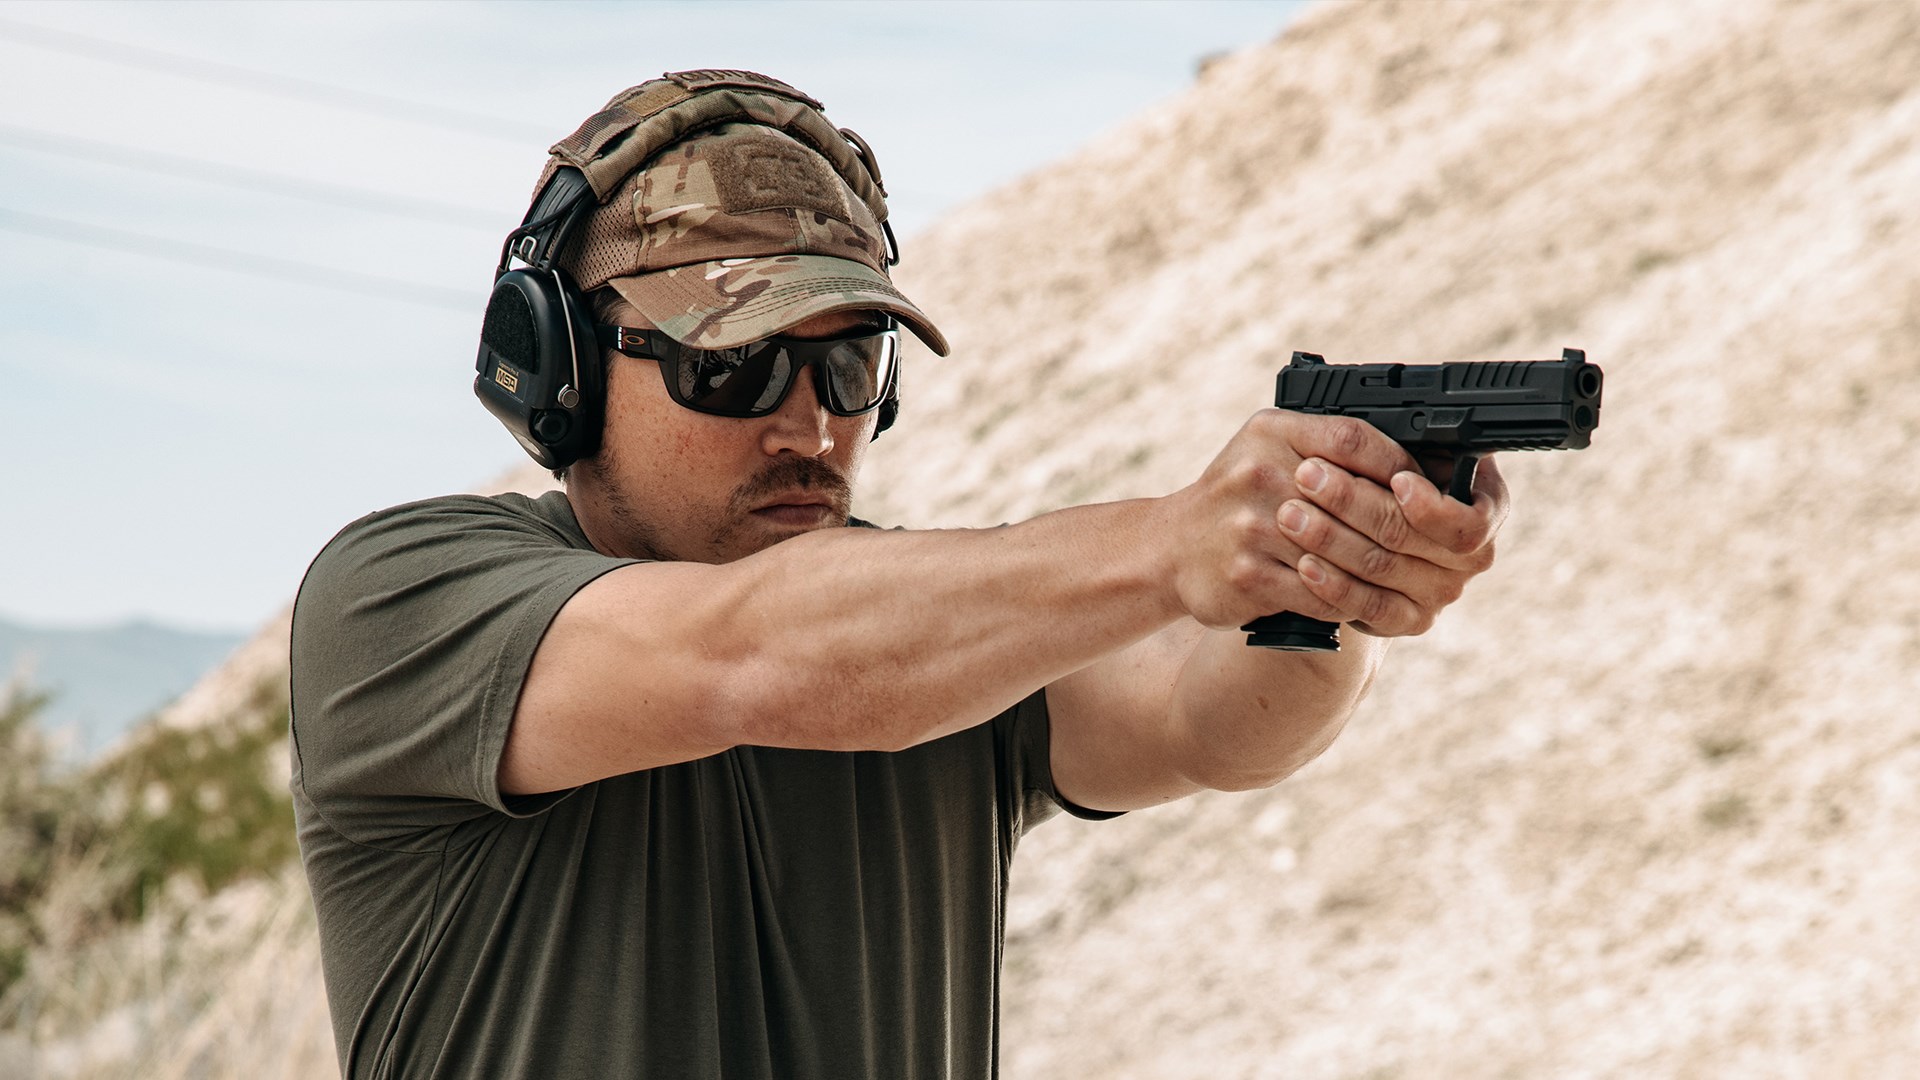 A man with hat and ear protection aiming a black Springfield Armory Echelon in a desert.